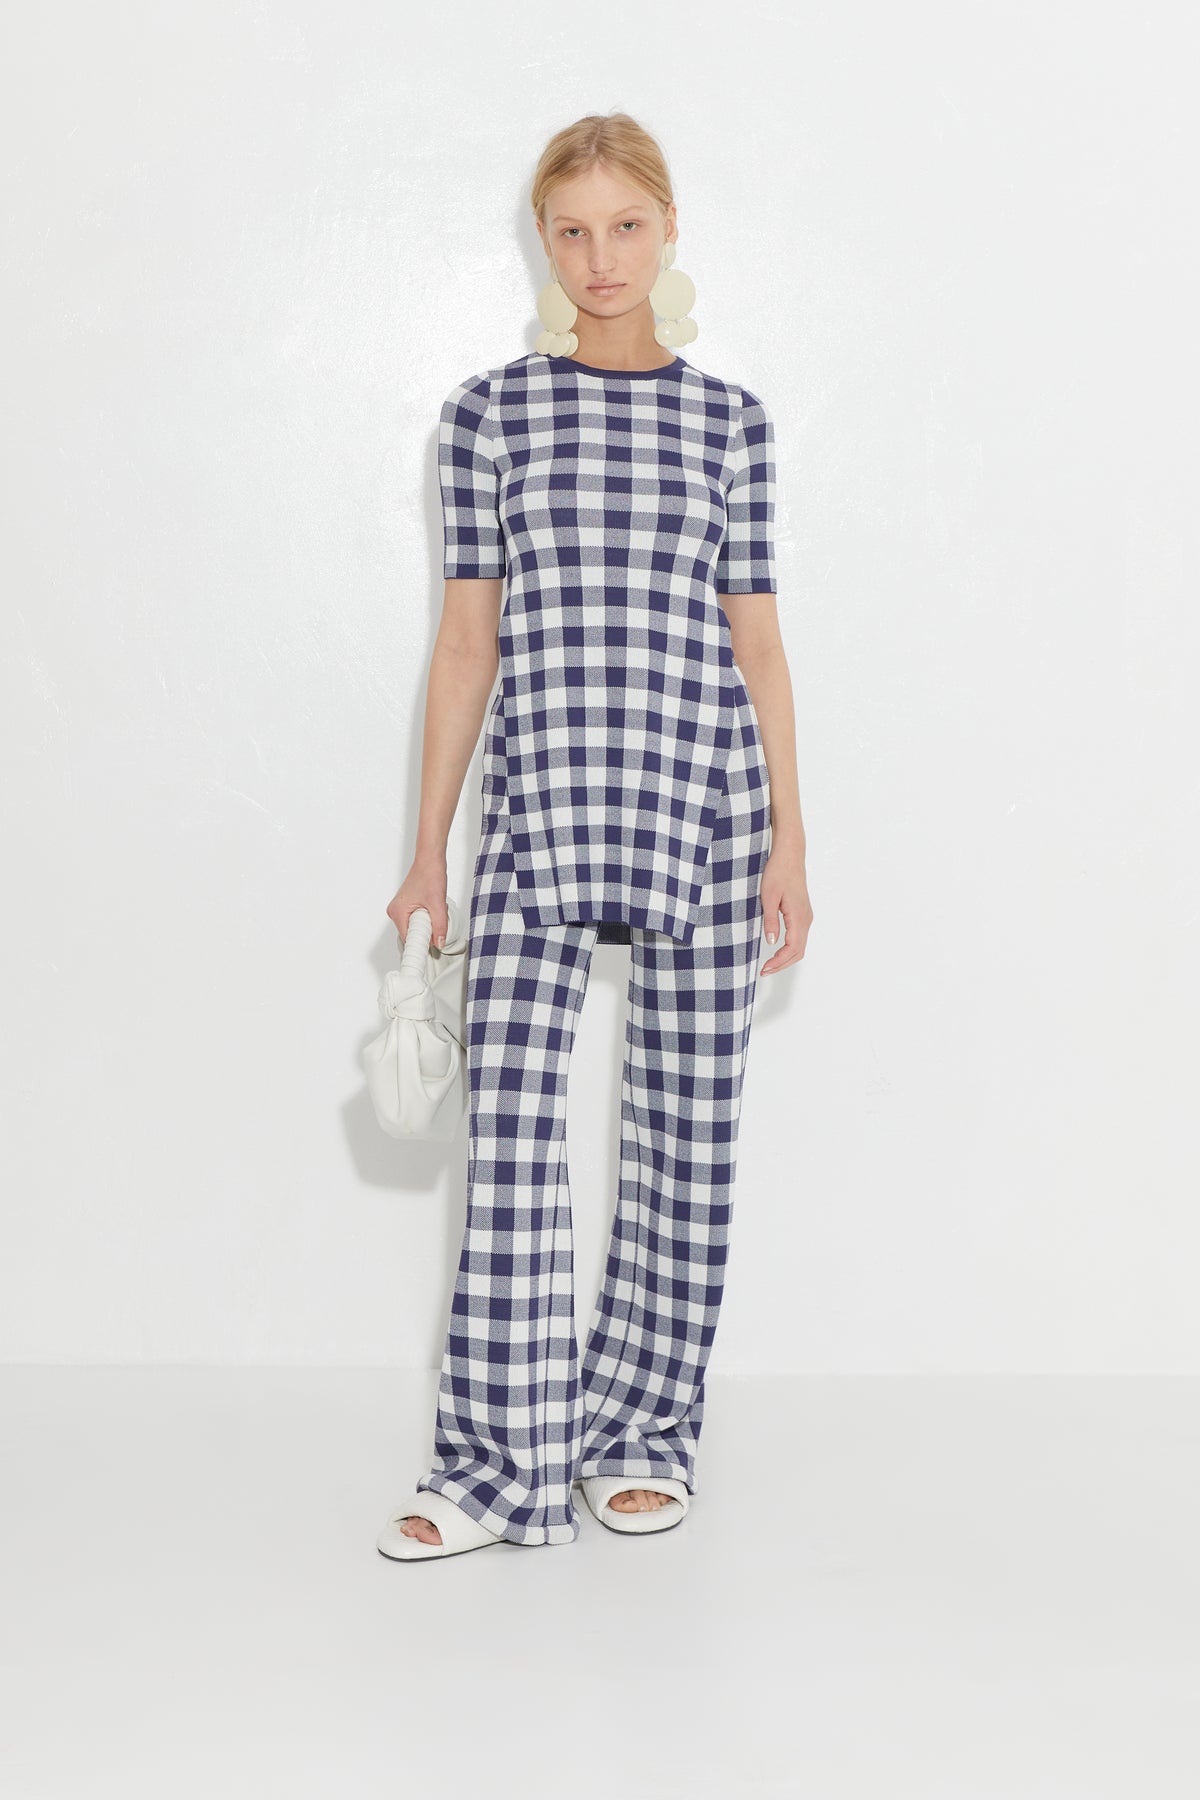 Knits By Jabber Pant in Ink Gingham